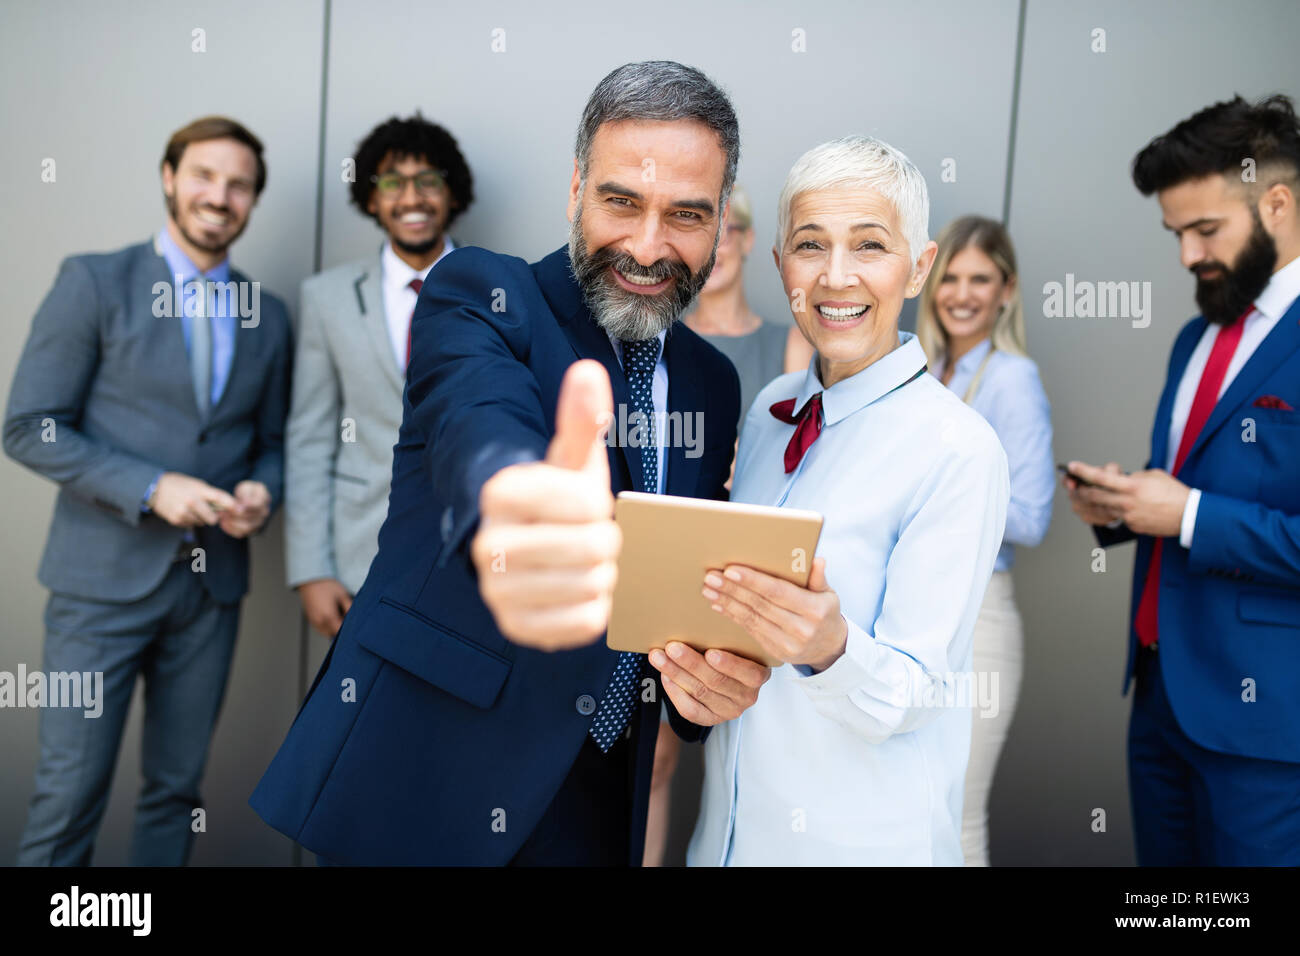 Portrait of creative business team standing together and laughing Stock Photo